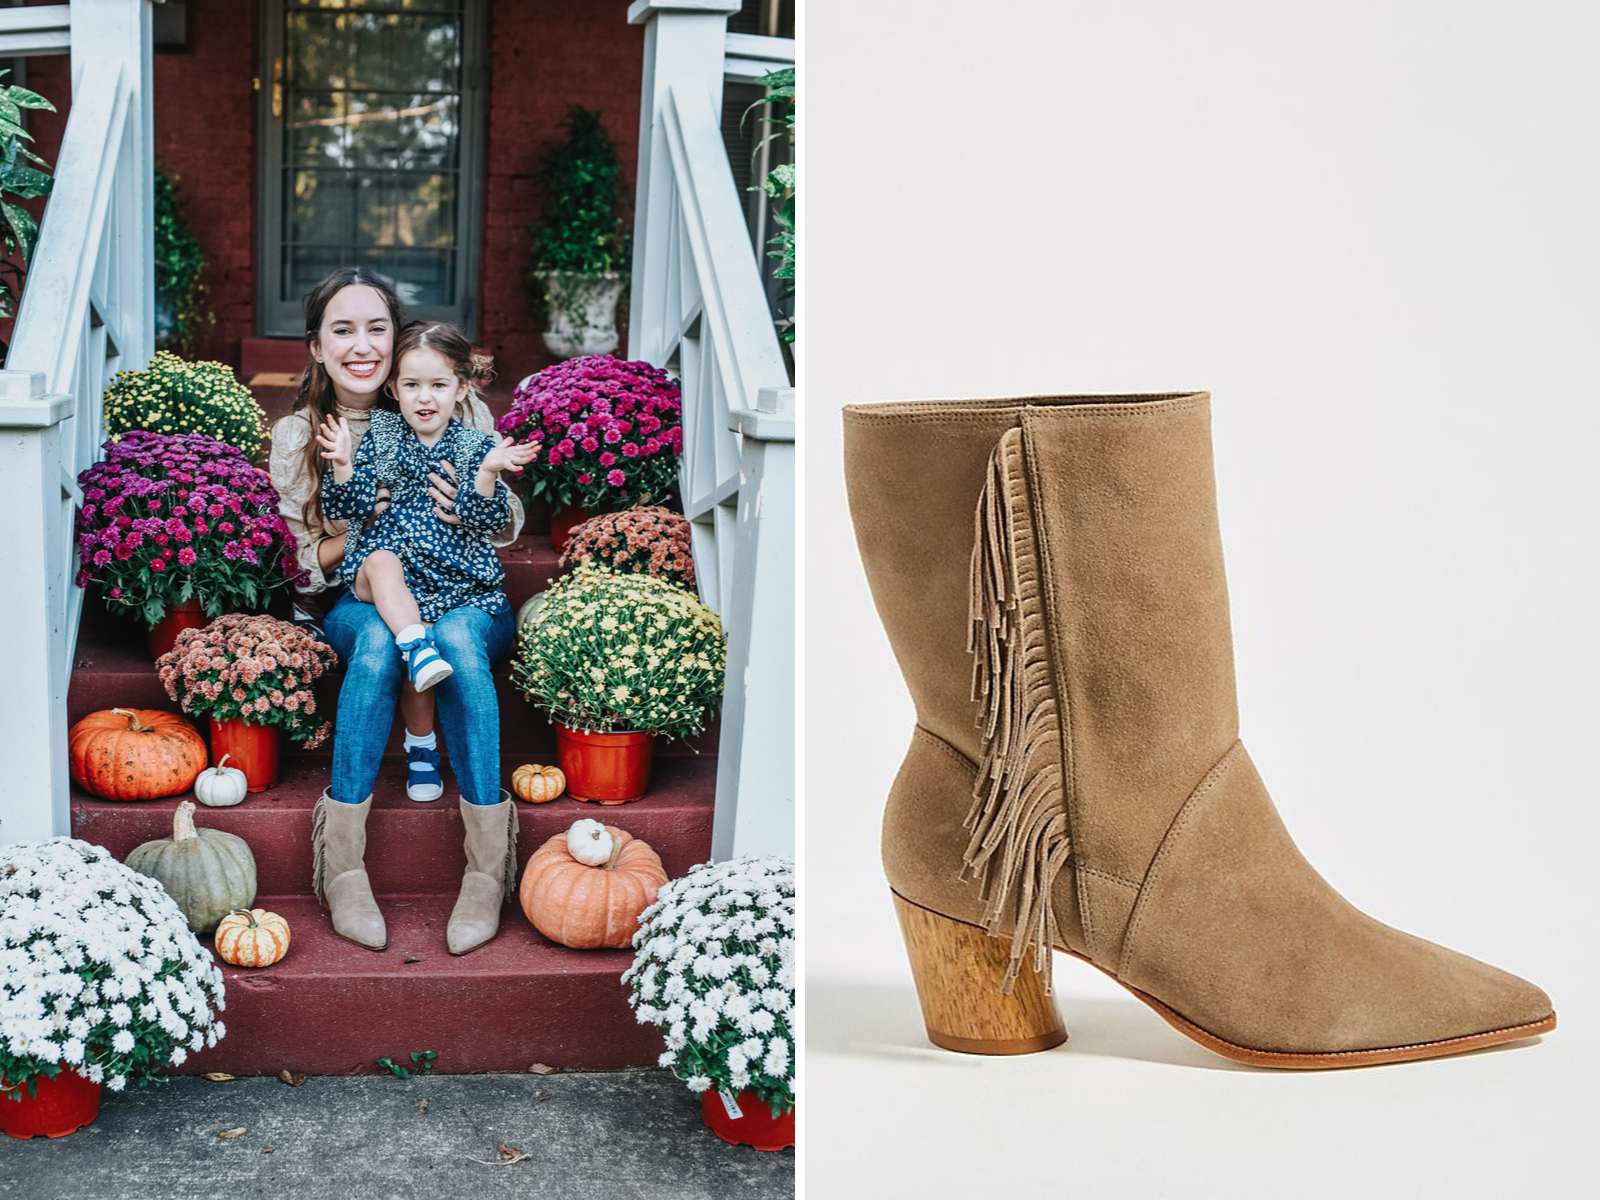 Cute Winter Boot Trends for 2019 featured by top US fashion blog, Lone Star Looking Glass: image of suede fringe booties